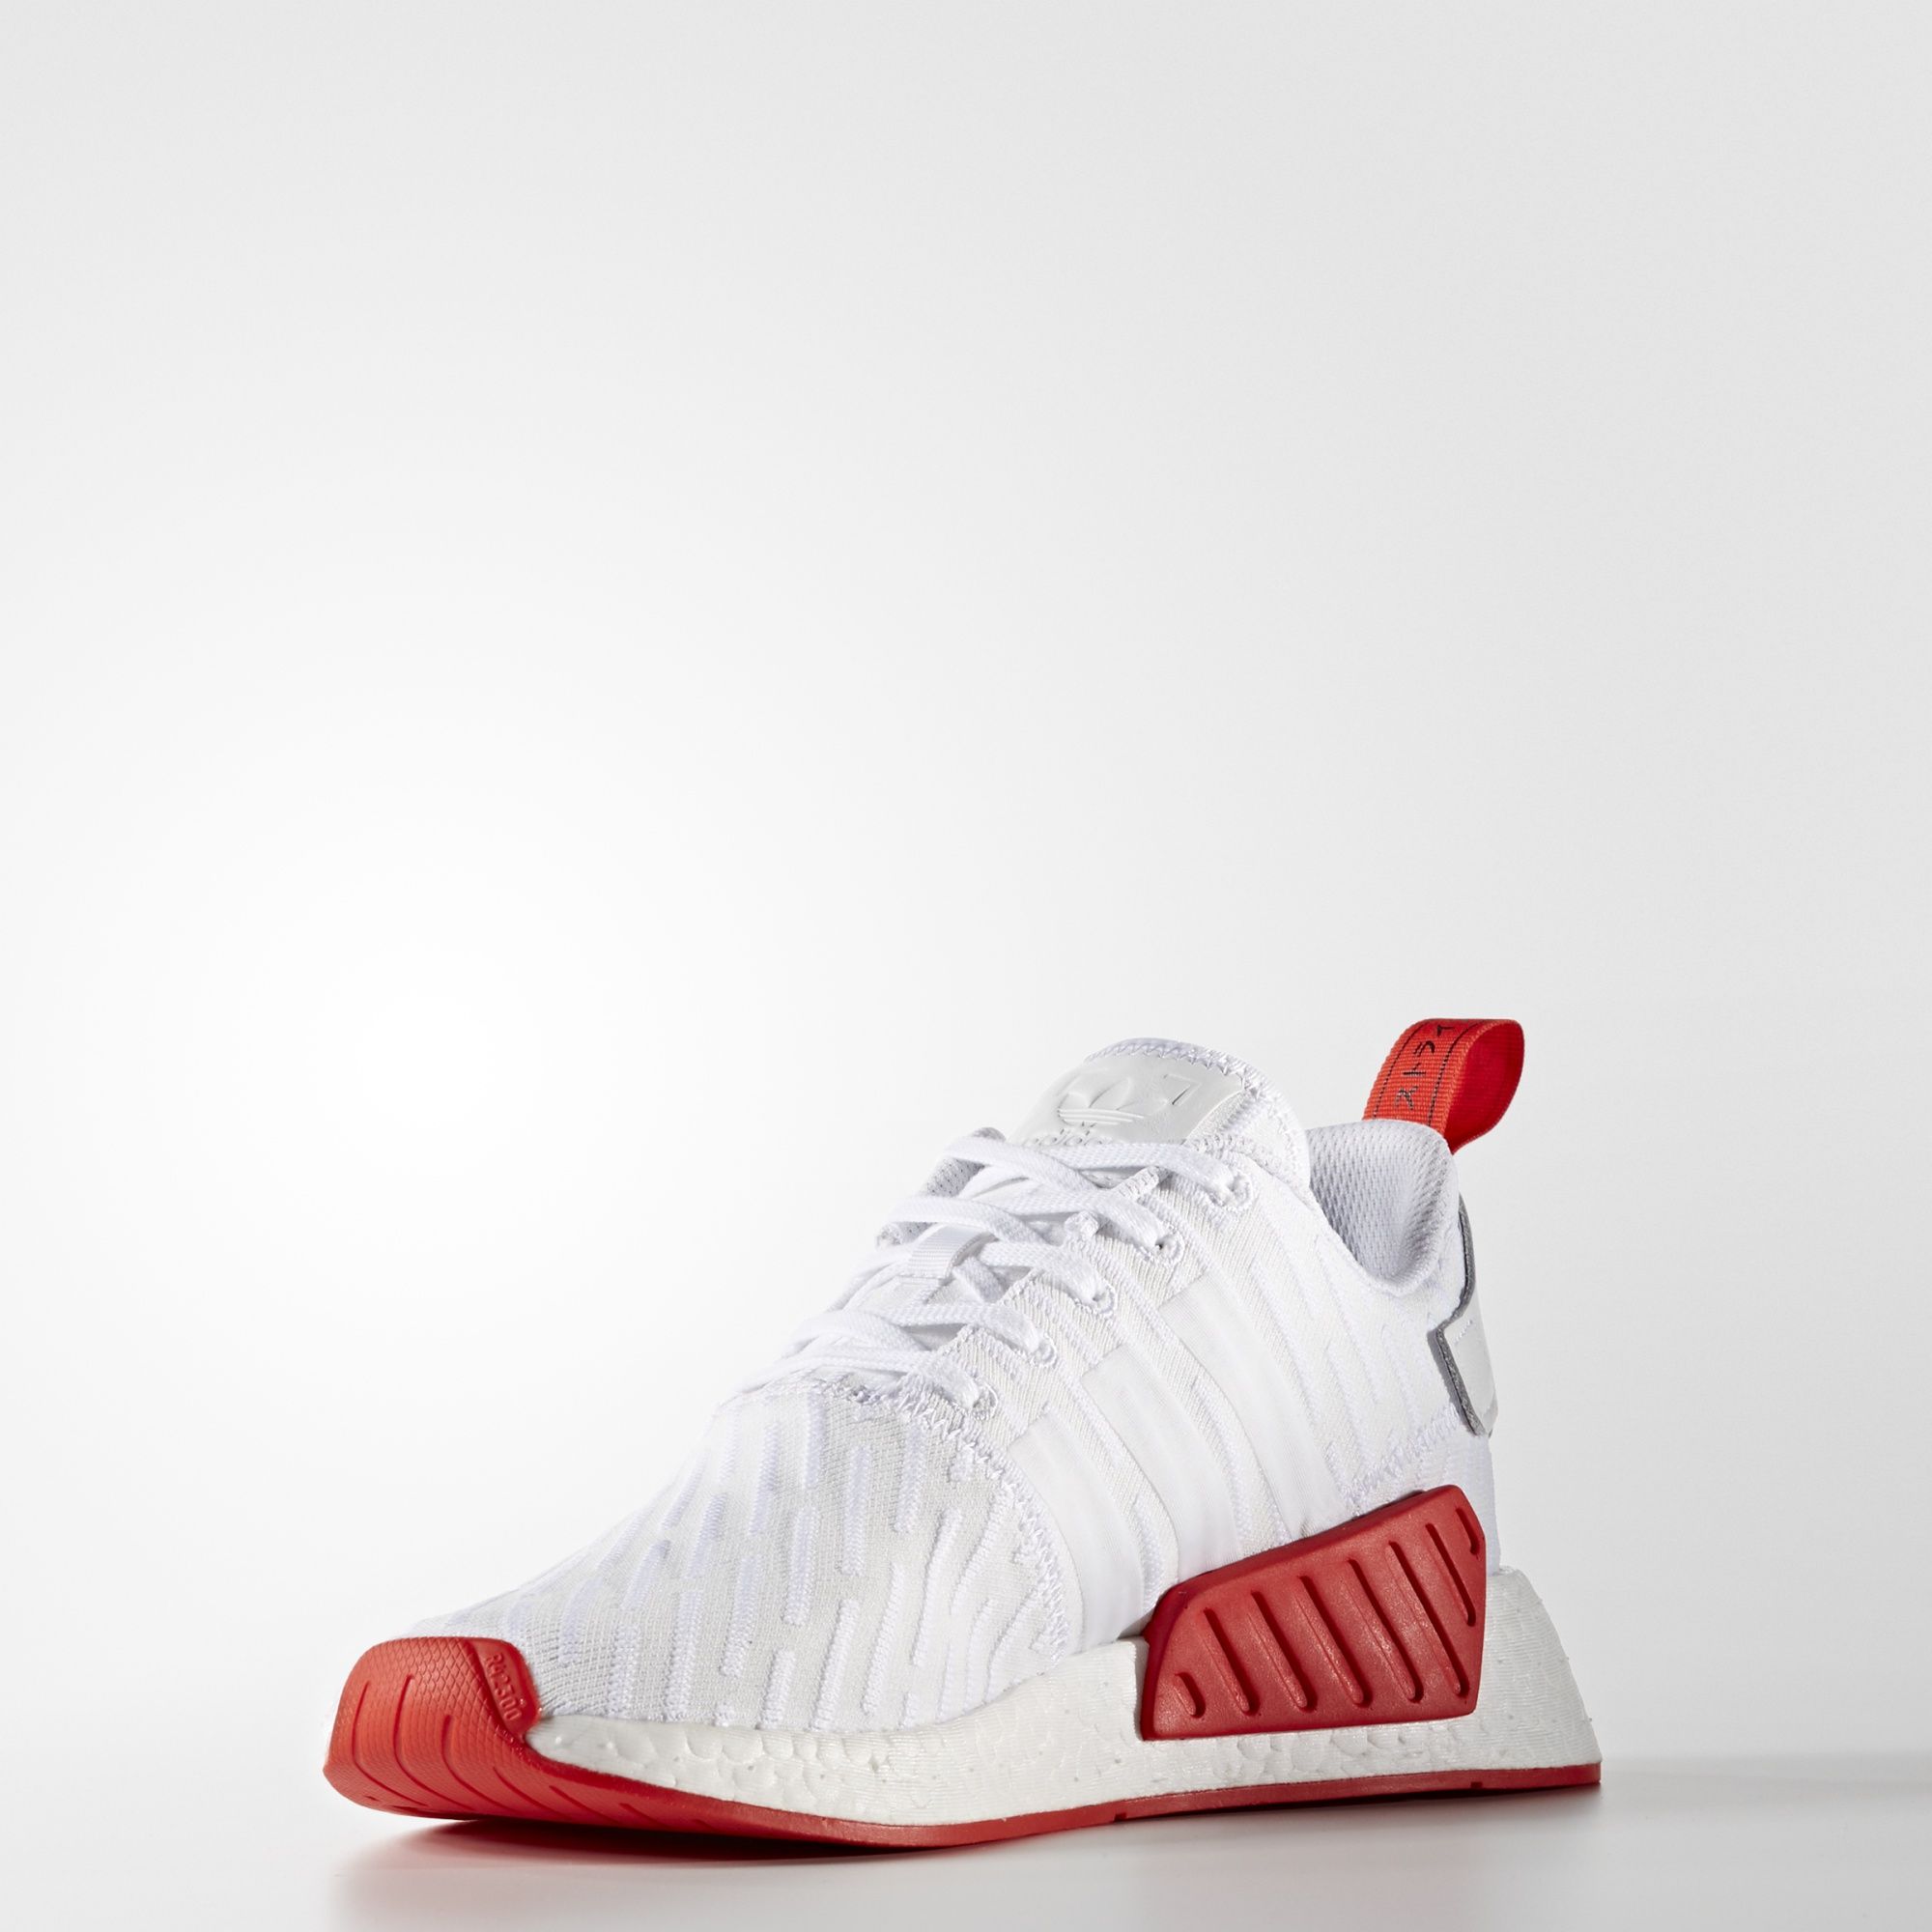 adidas-nmd_r2-pk-white-core-red-3